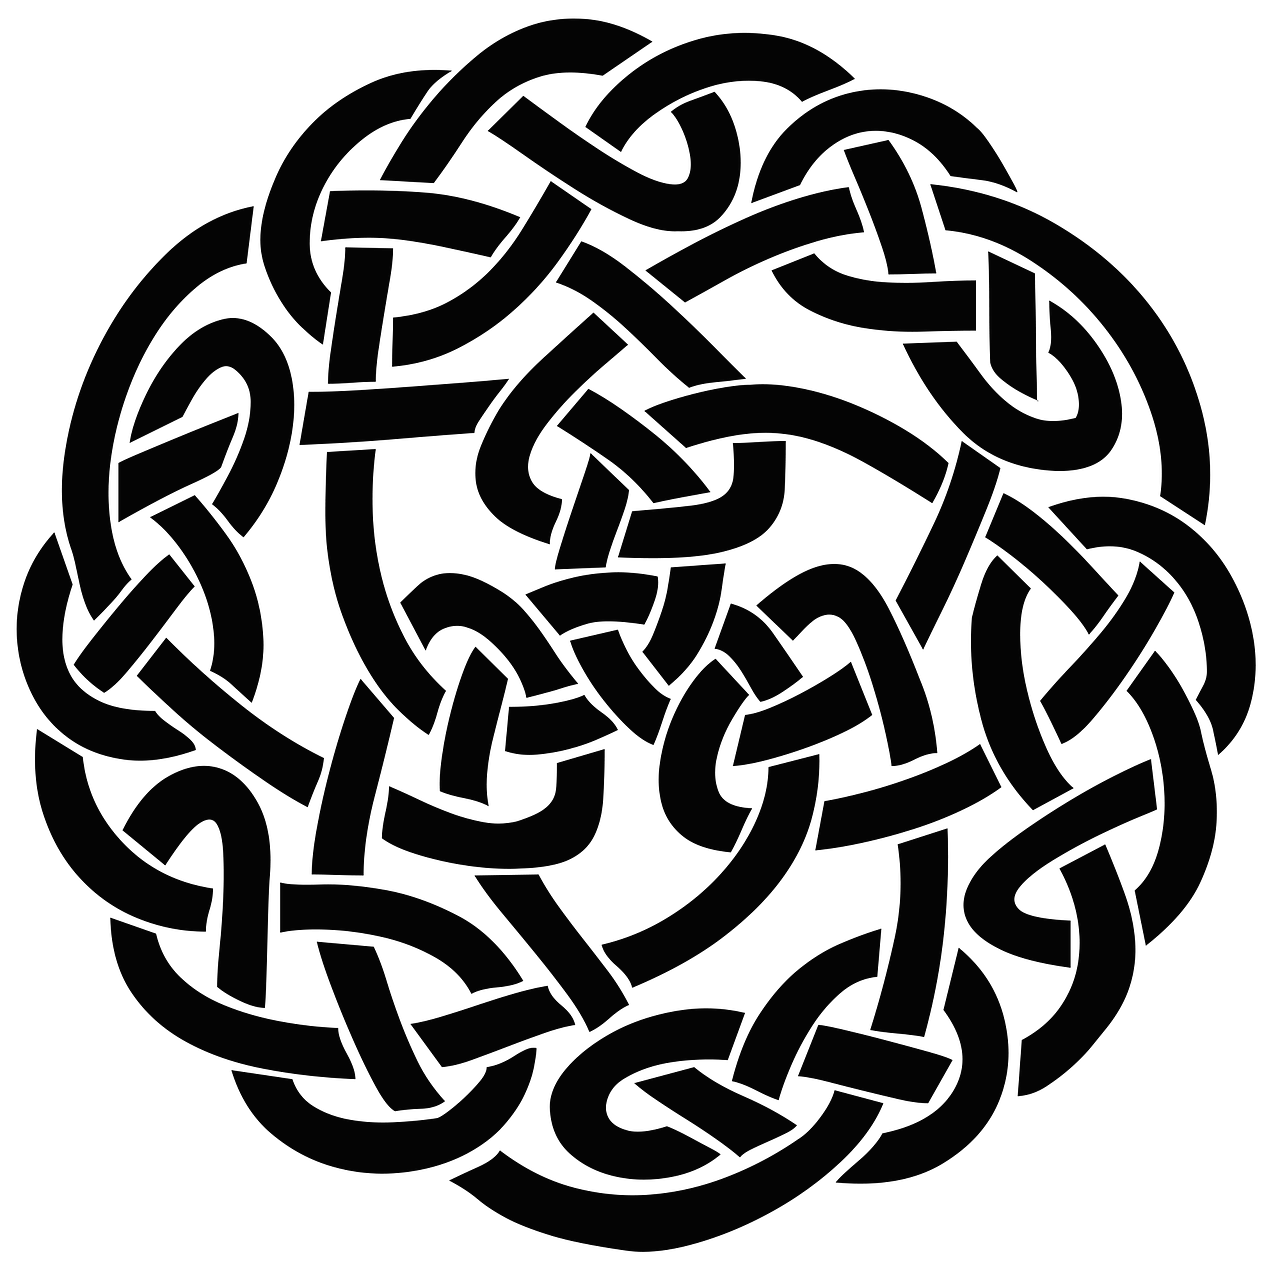 celtic knot silhouette free photo